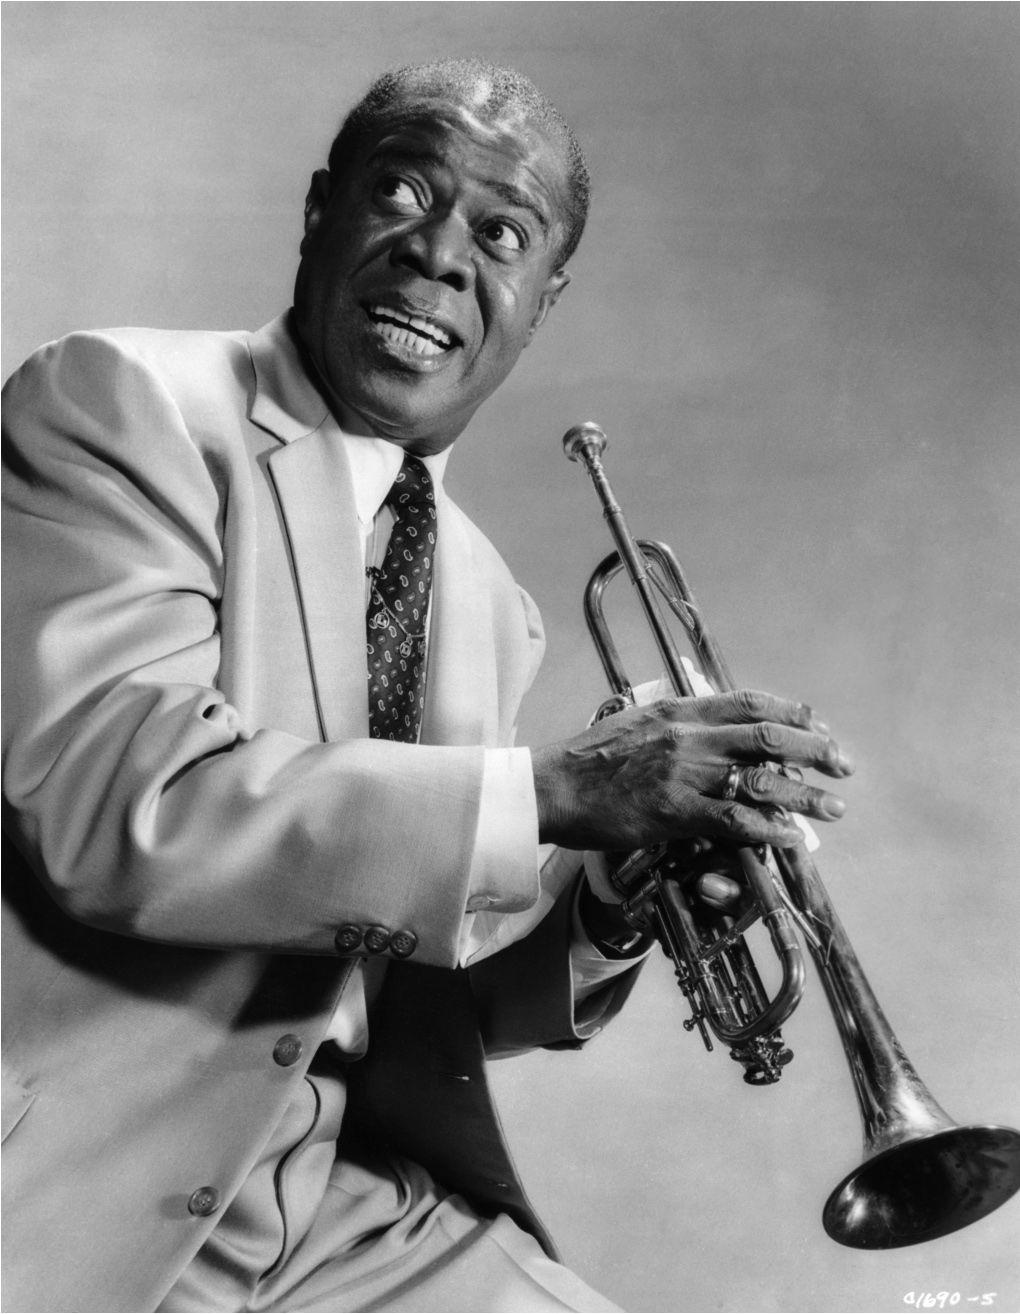 Louis Armstrong Wallpaper Free HD. I HD Image